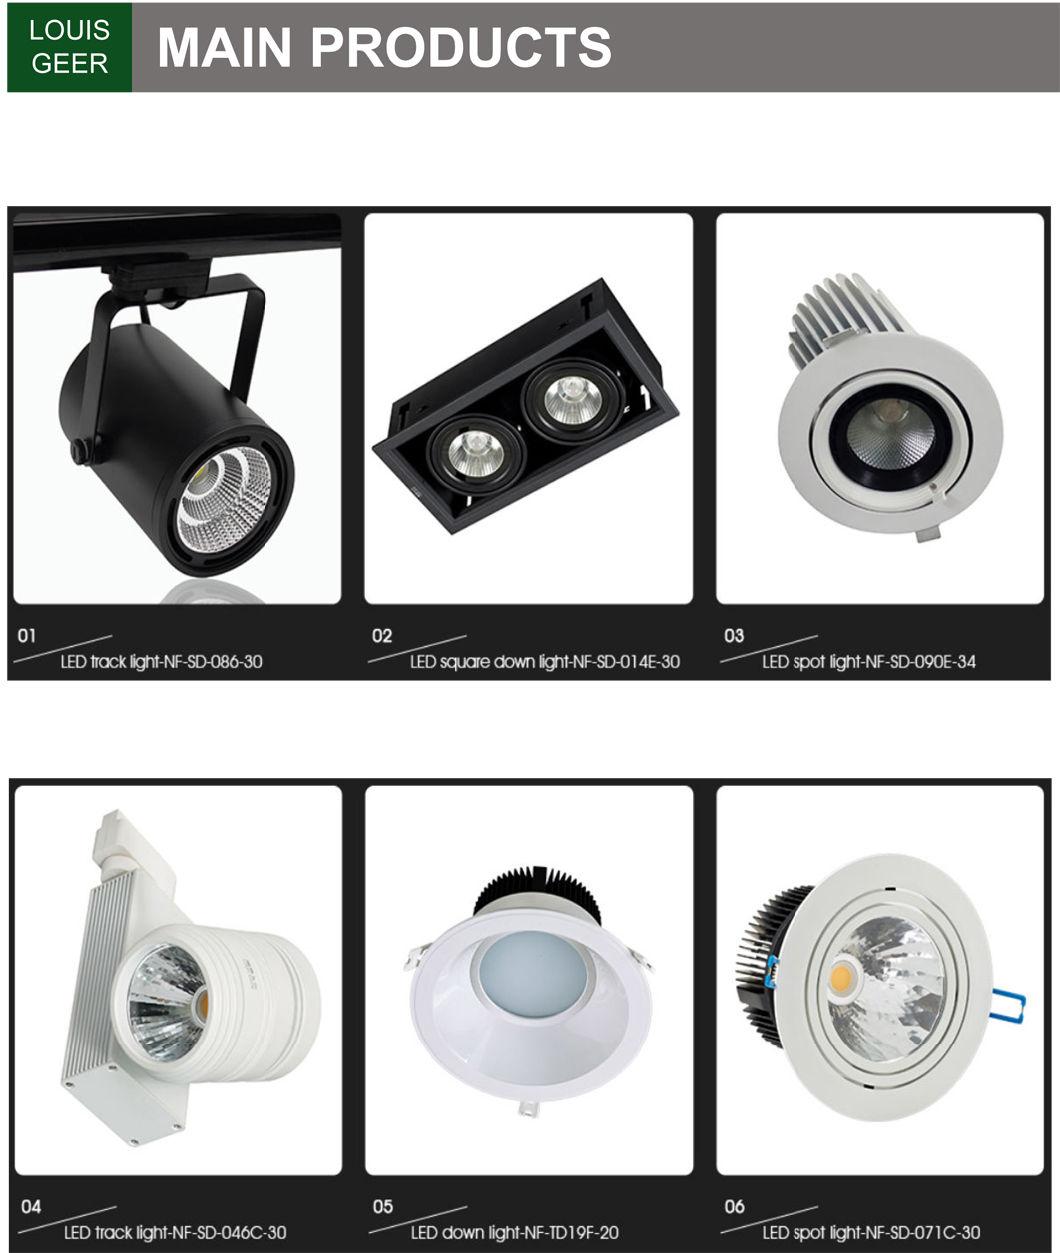 Factory Supplier 45W Modern Die Cast Square Rotation Adjustable Recessed Mounted LED Grille Light